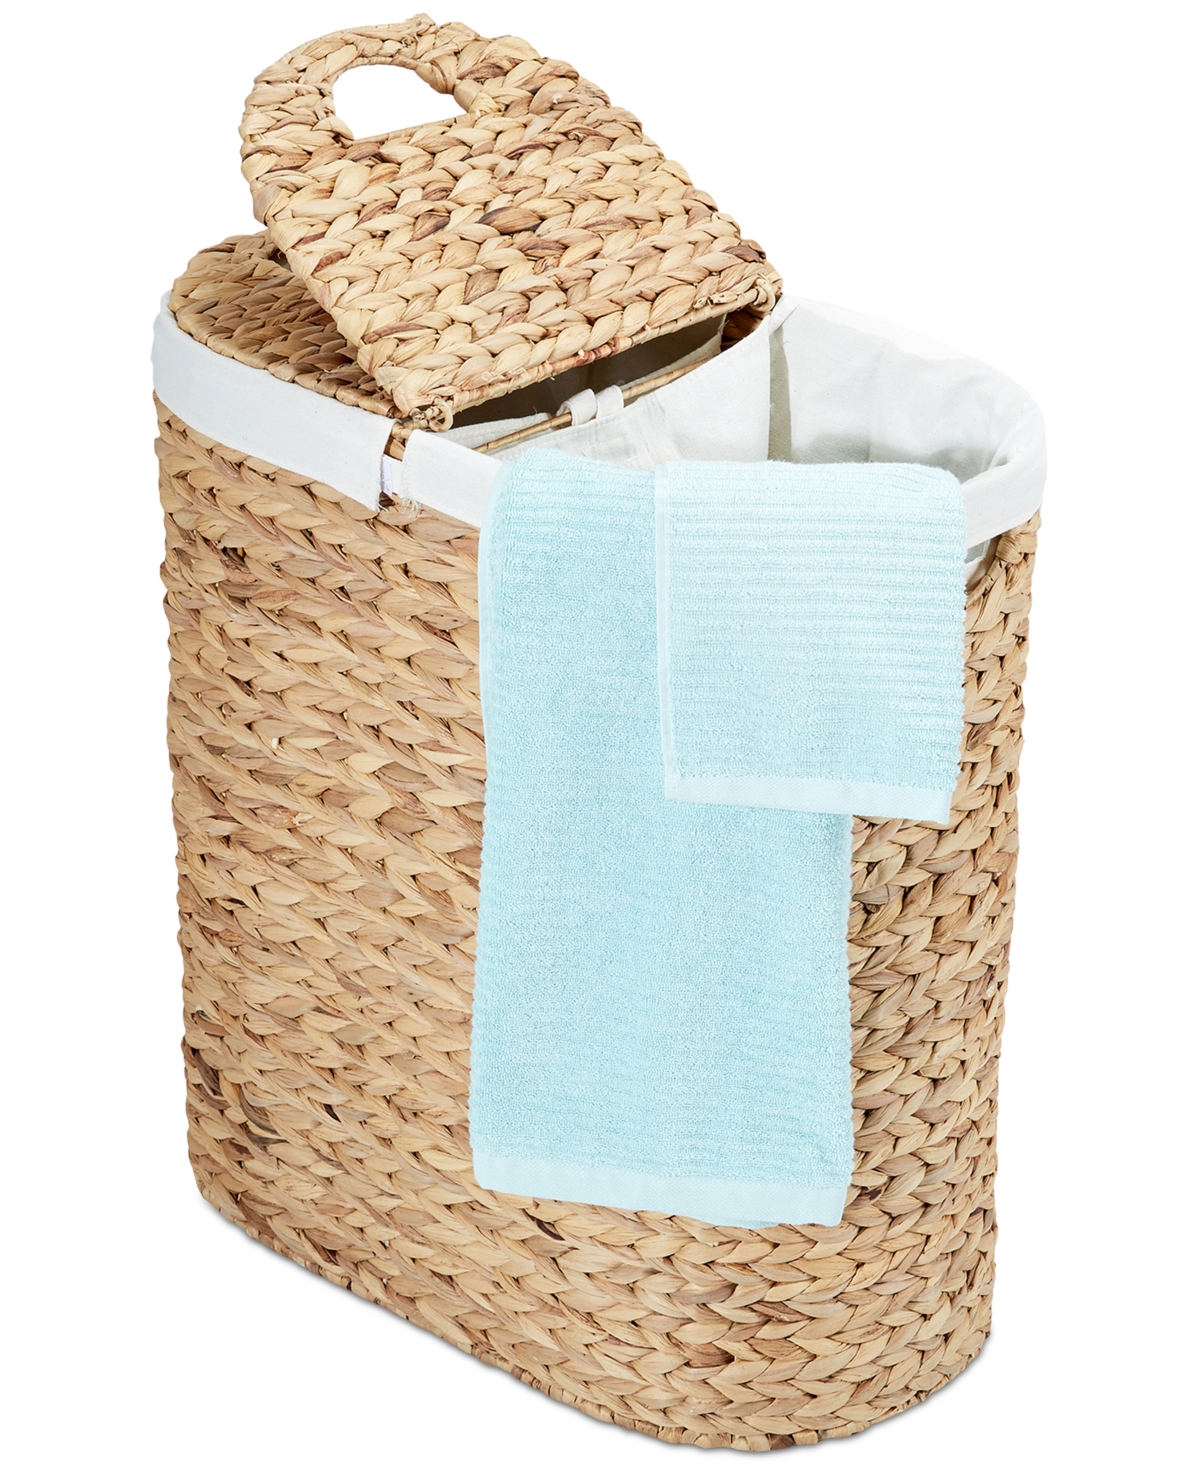 Seville Classics Hand-woven Natural Wicker Lidded Double Laundry Hamper